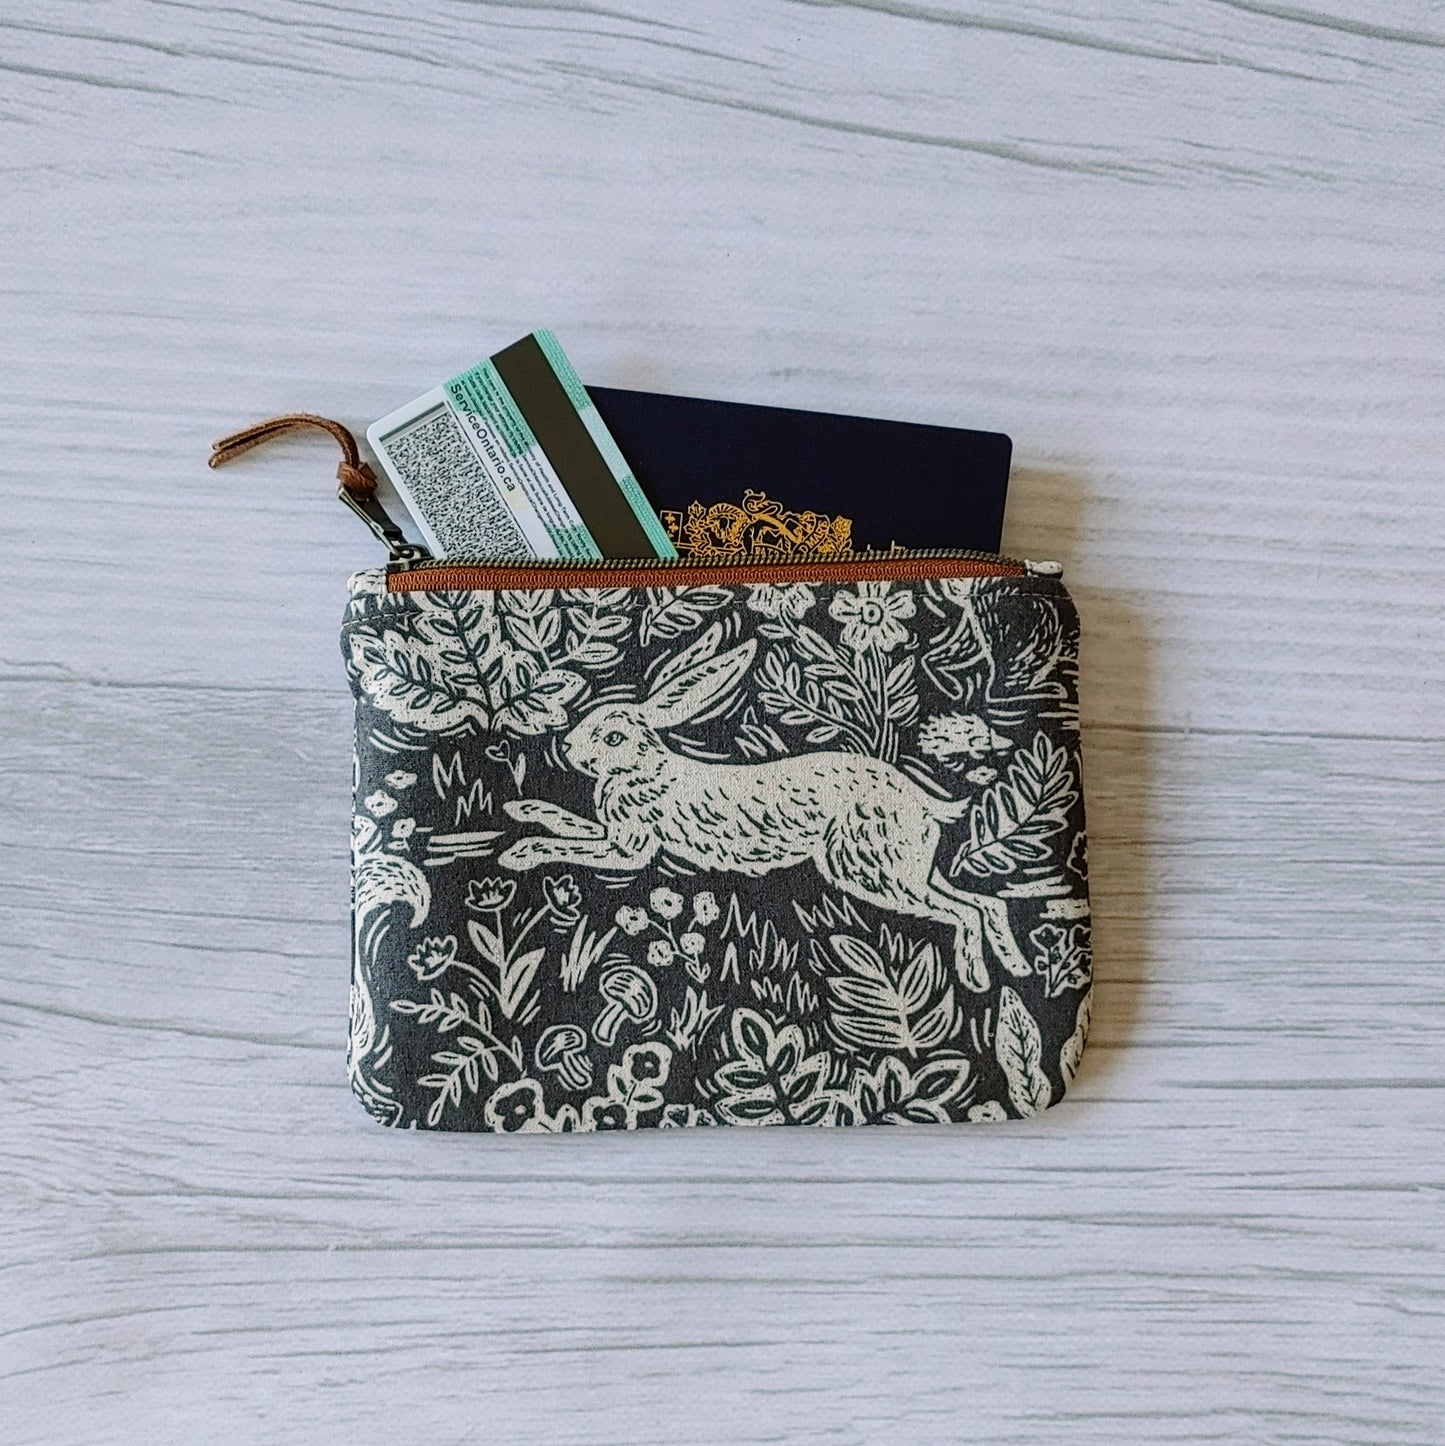 Passport Pouch in Fable Hare by Rifle Paper Co print. From Plumage Studio Accessories